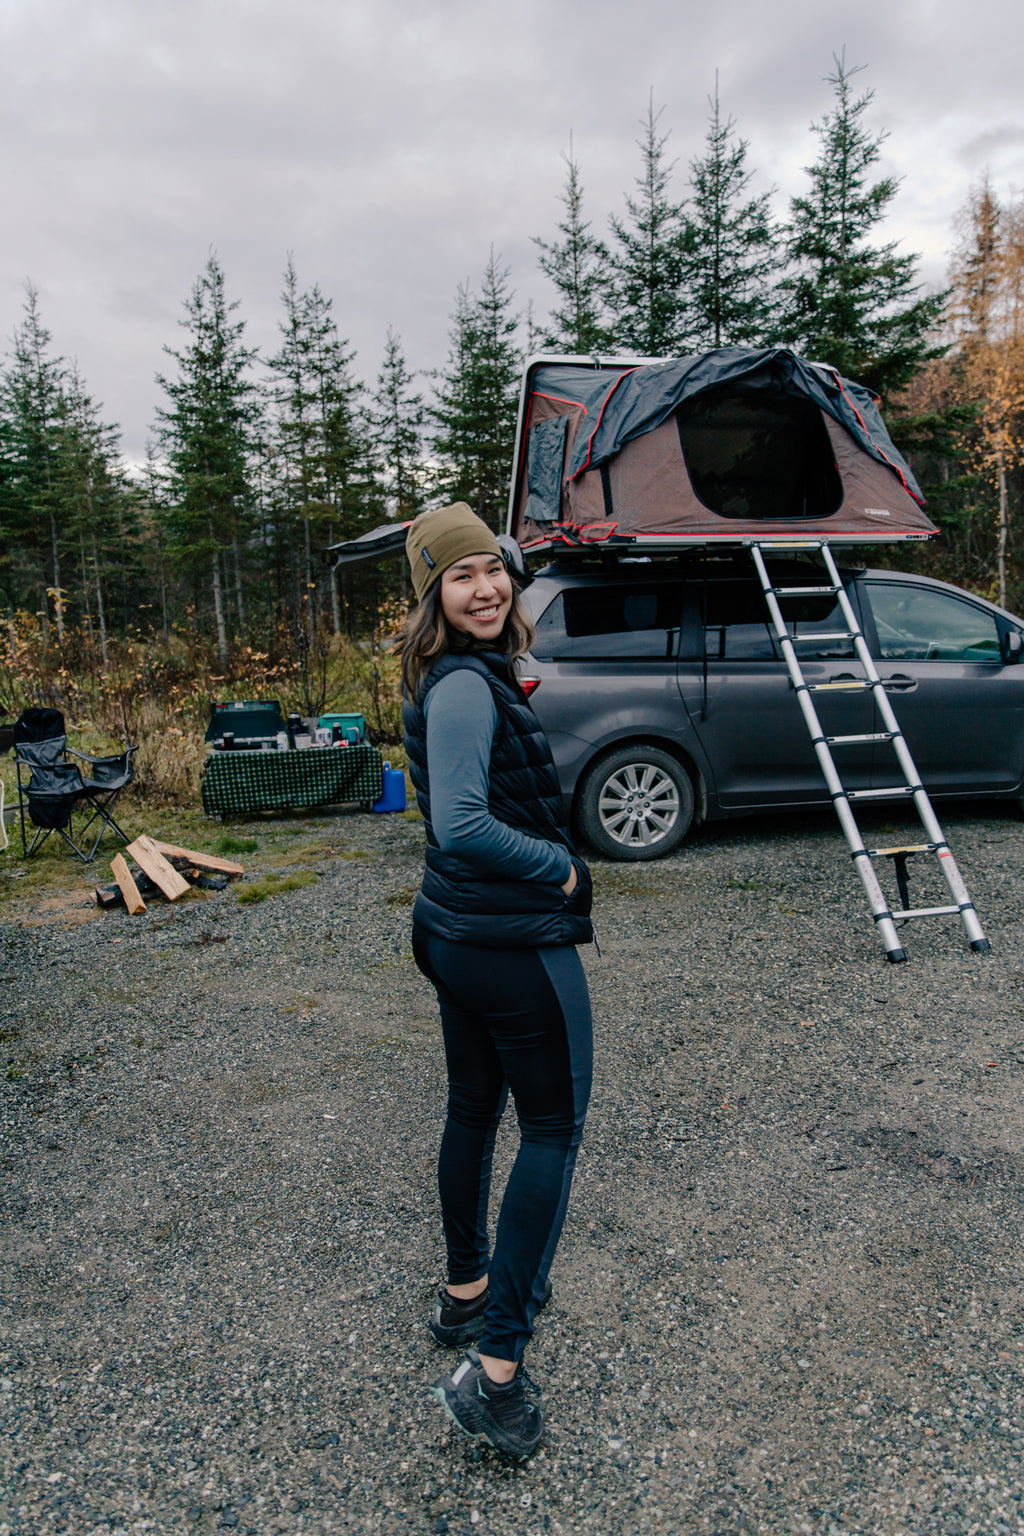 The Best Women's Camping Clothes for Comfort Outdoors - Alpine Fit